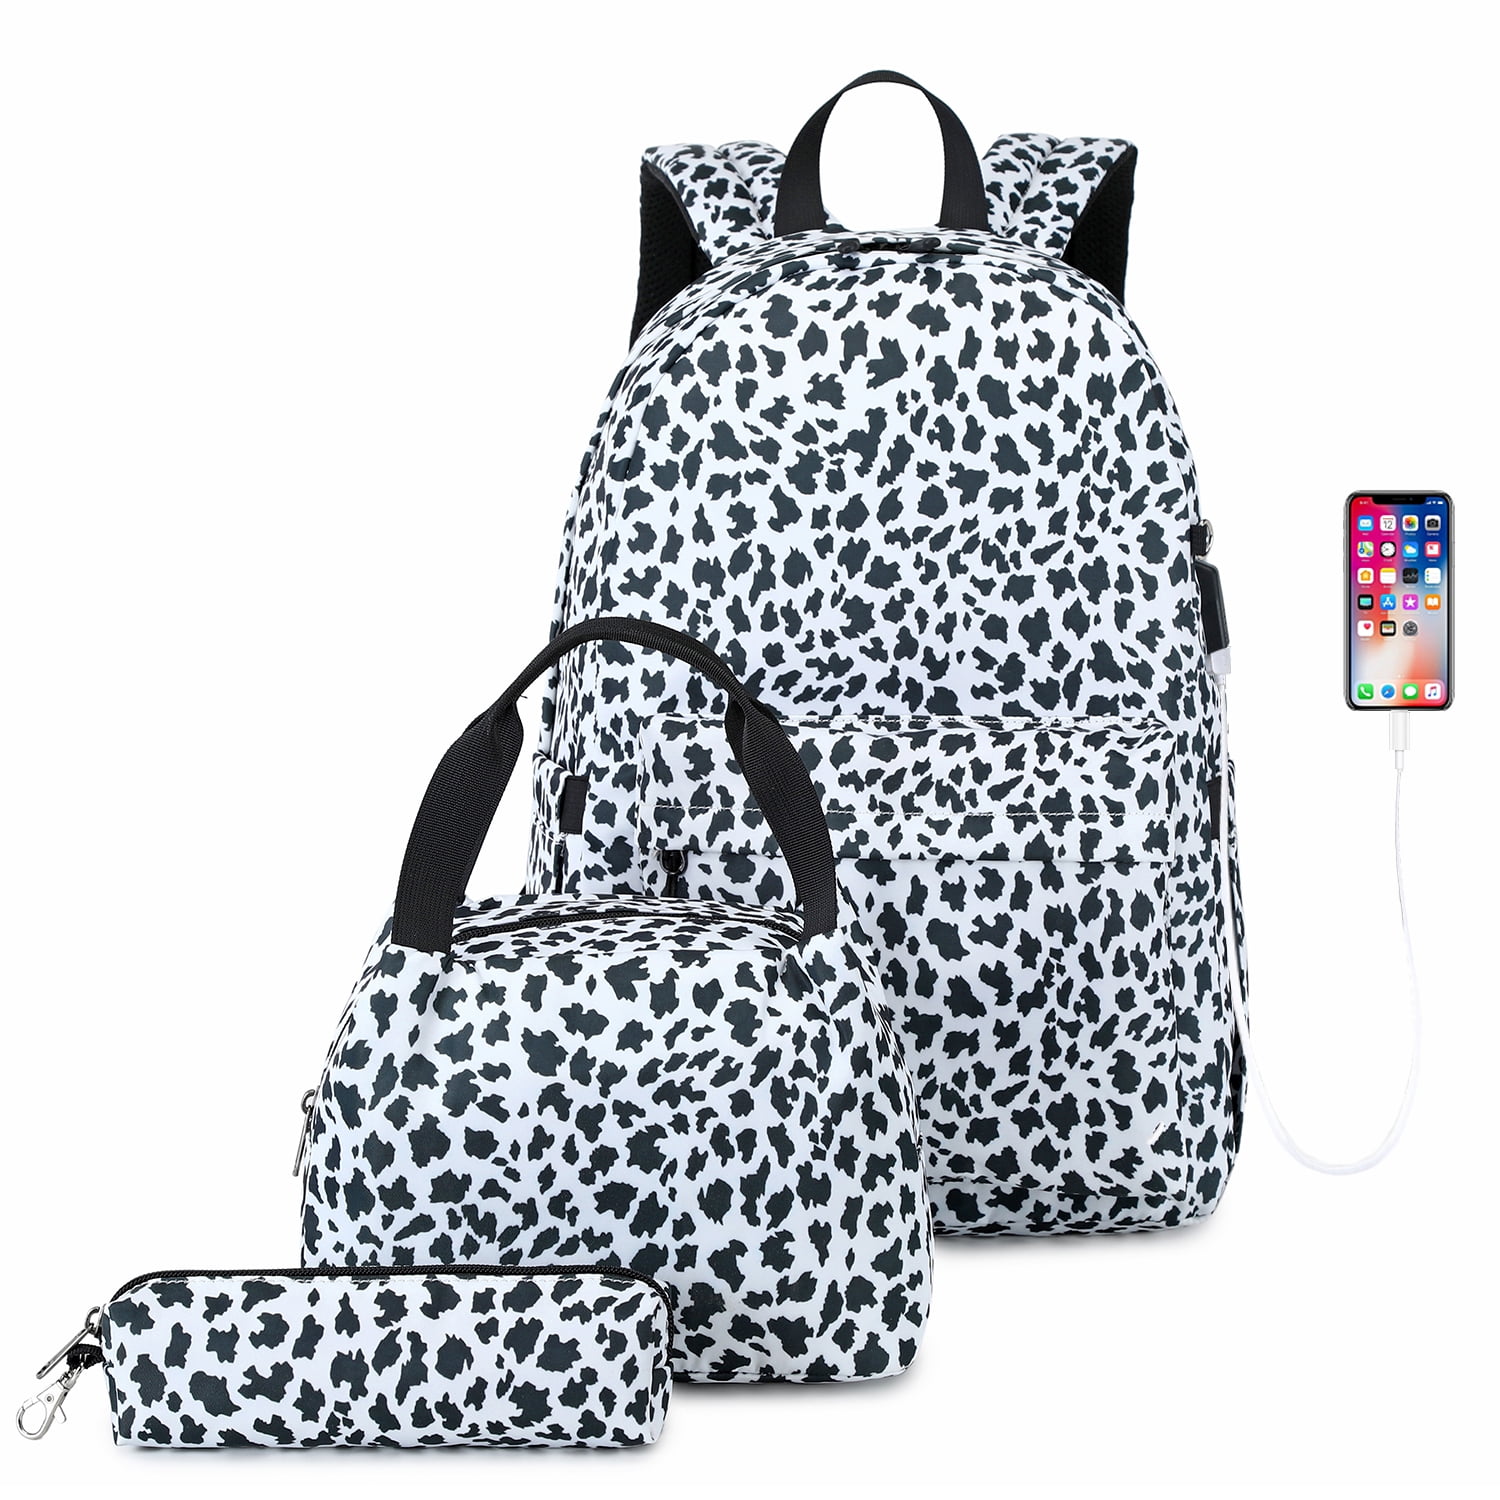 Girls Lunch Box Set/kids Leopard Backpack/girls 3 Pc Personalized